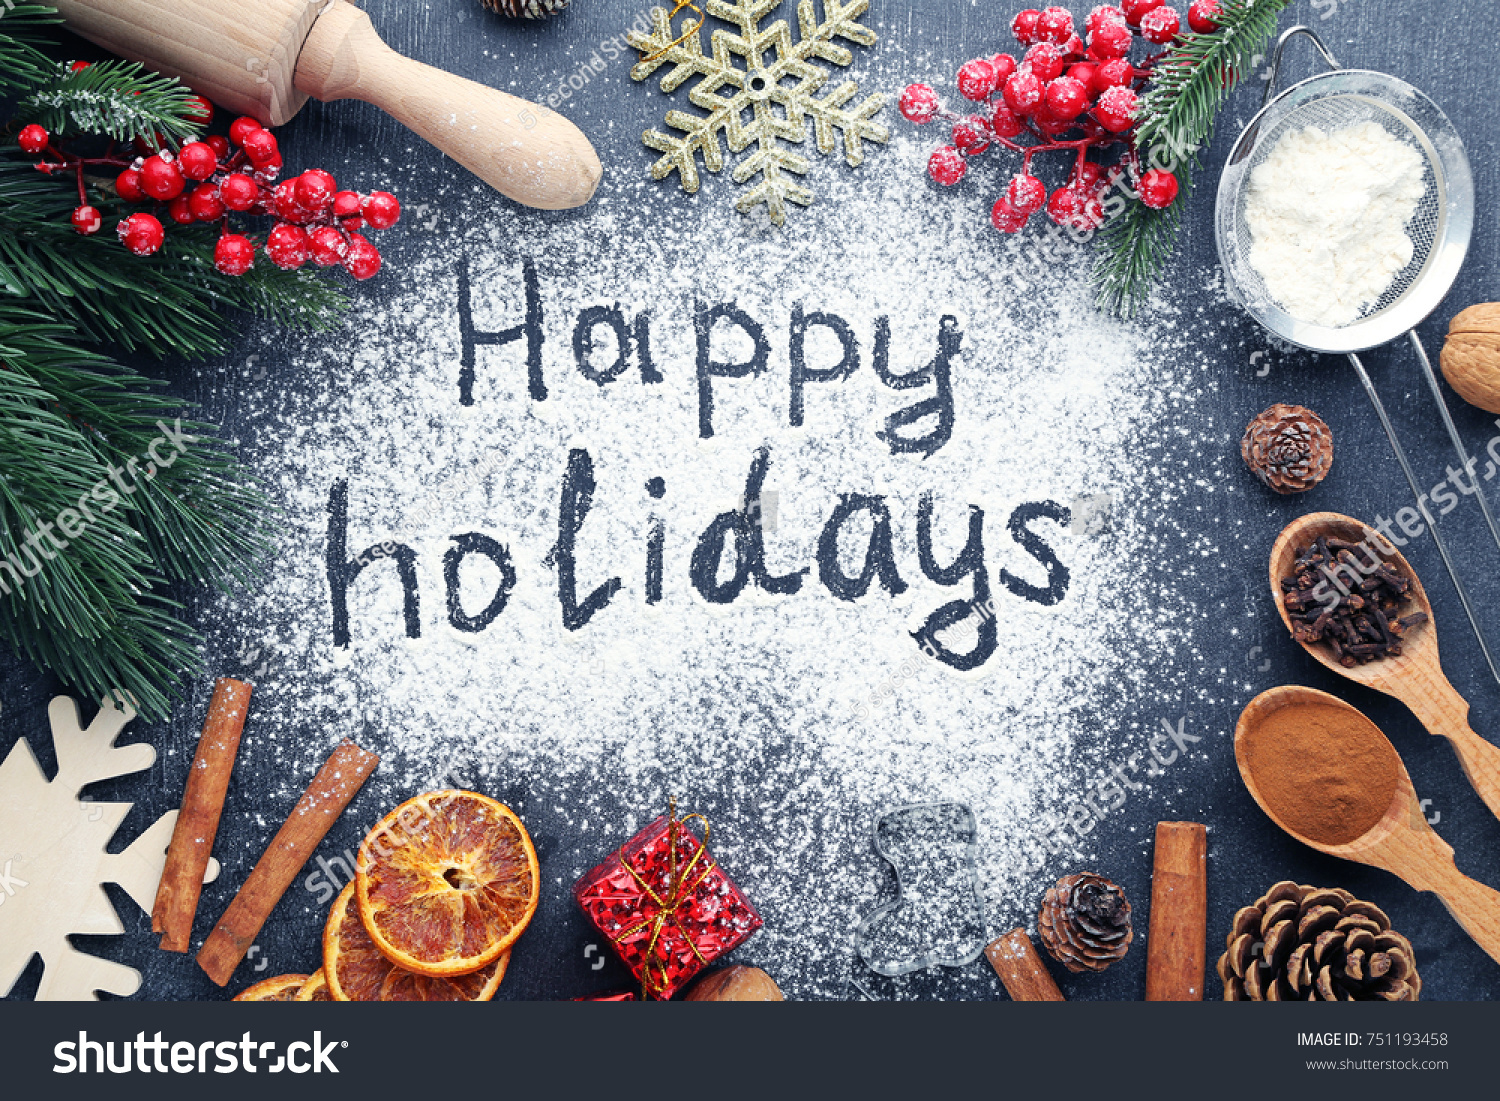 Inscription Happy Holidays on wheat flour background with fir-tree branches, orange fruits and cones #751193458